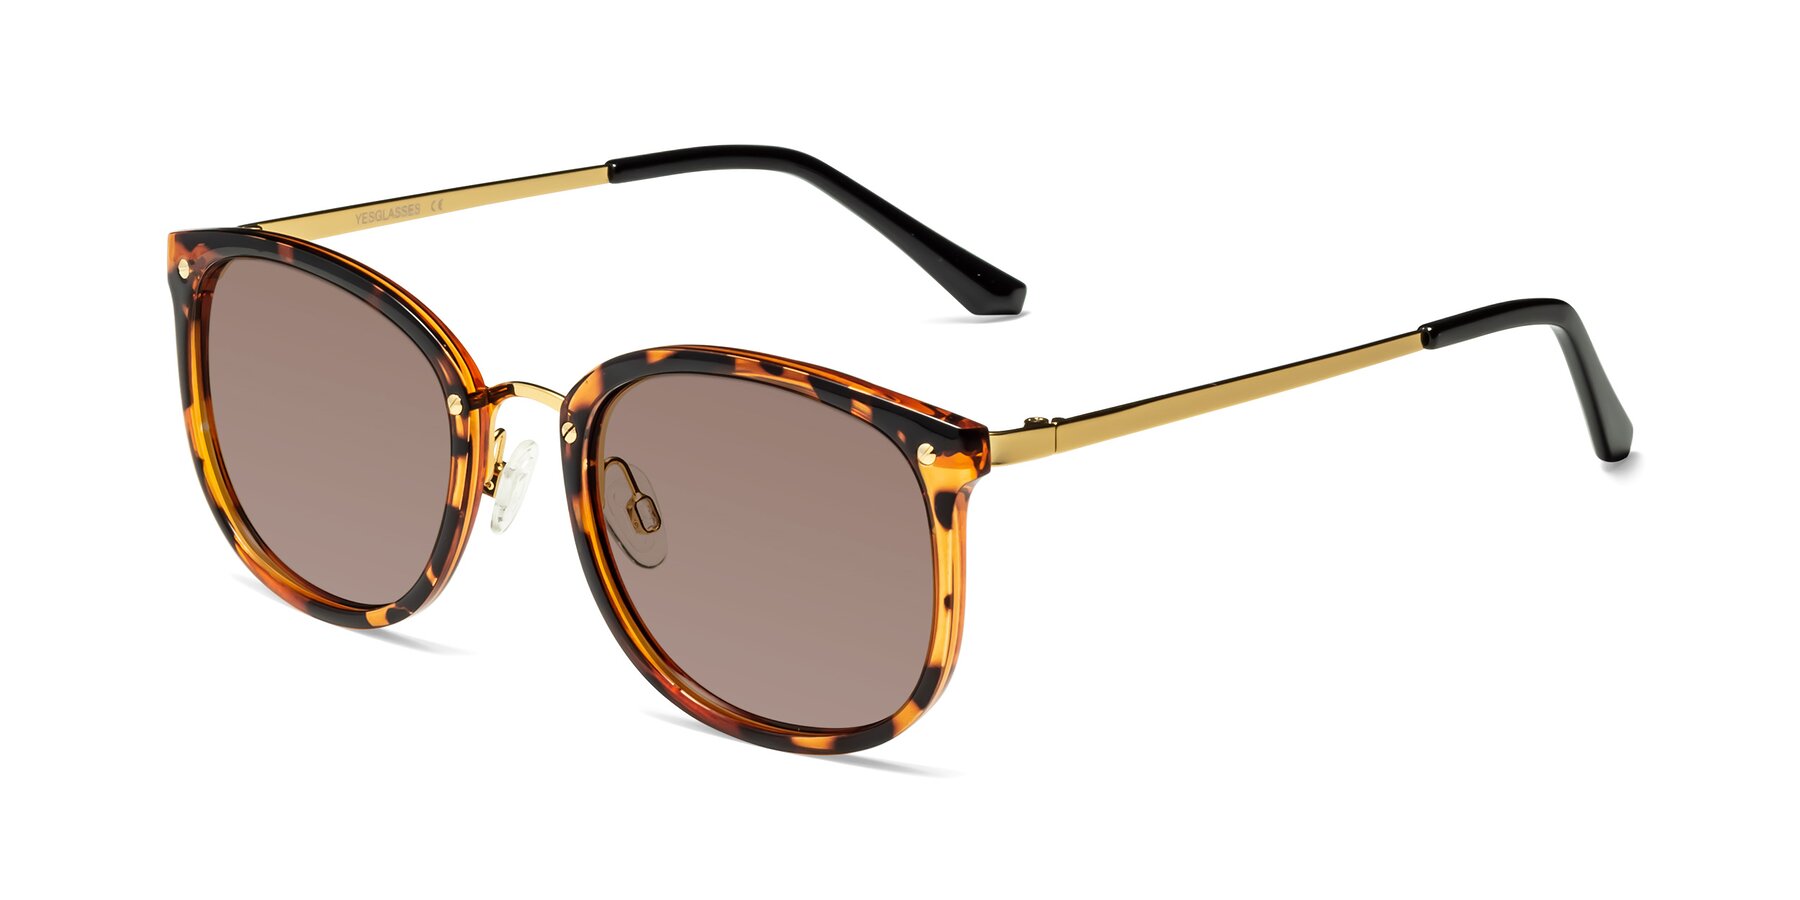 Angle of Timeless in Tortoise-Golden with Medium Brown Tinted Lenses